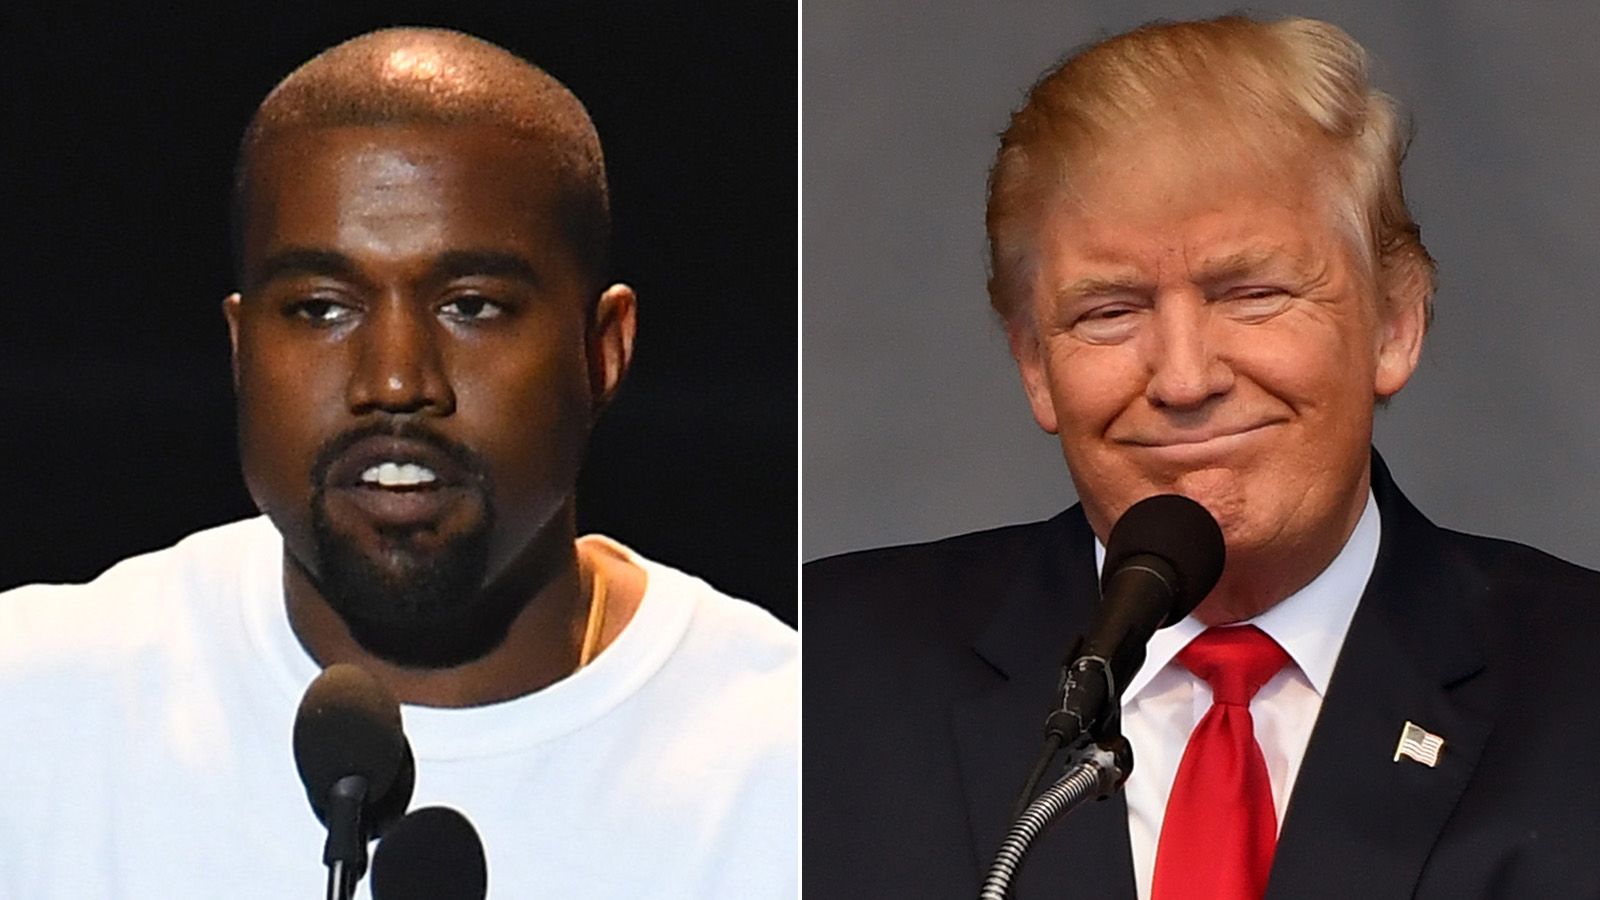 He was great to me': Trump speaks out in support of Kanye West amid tirades